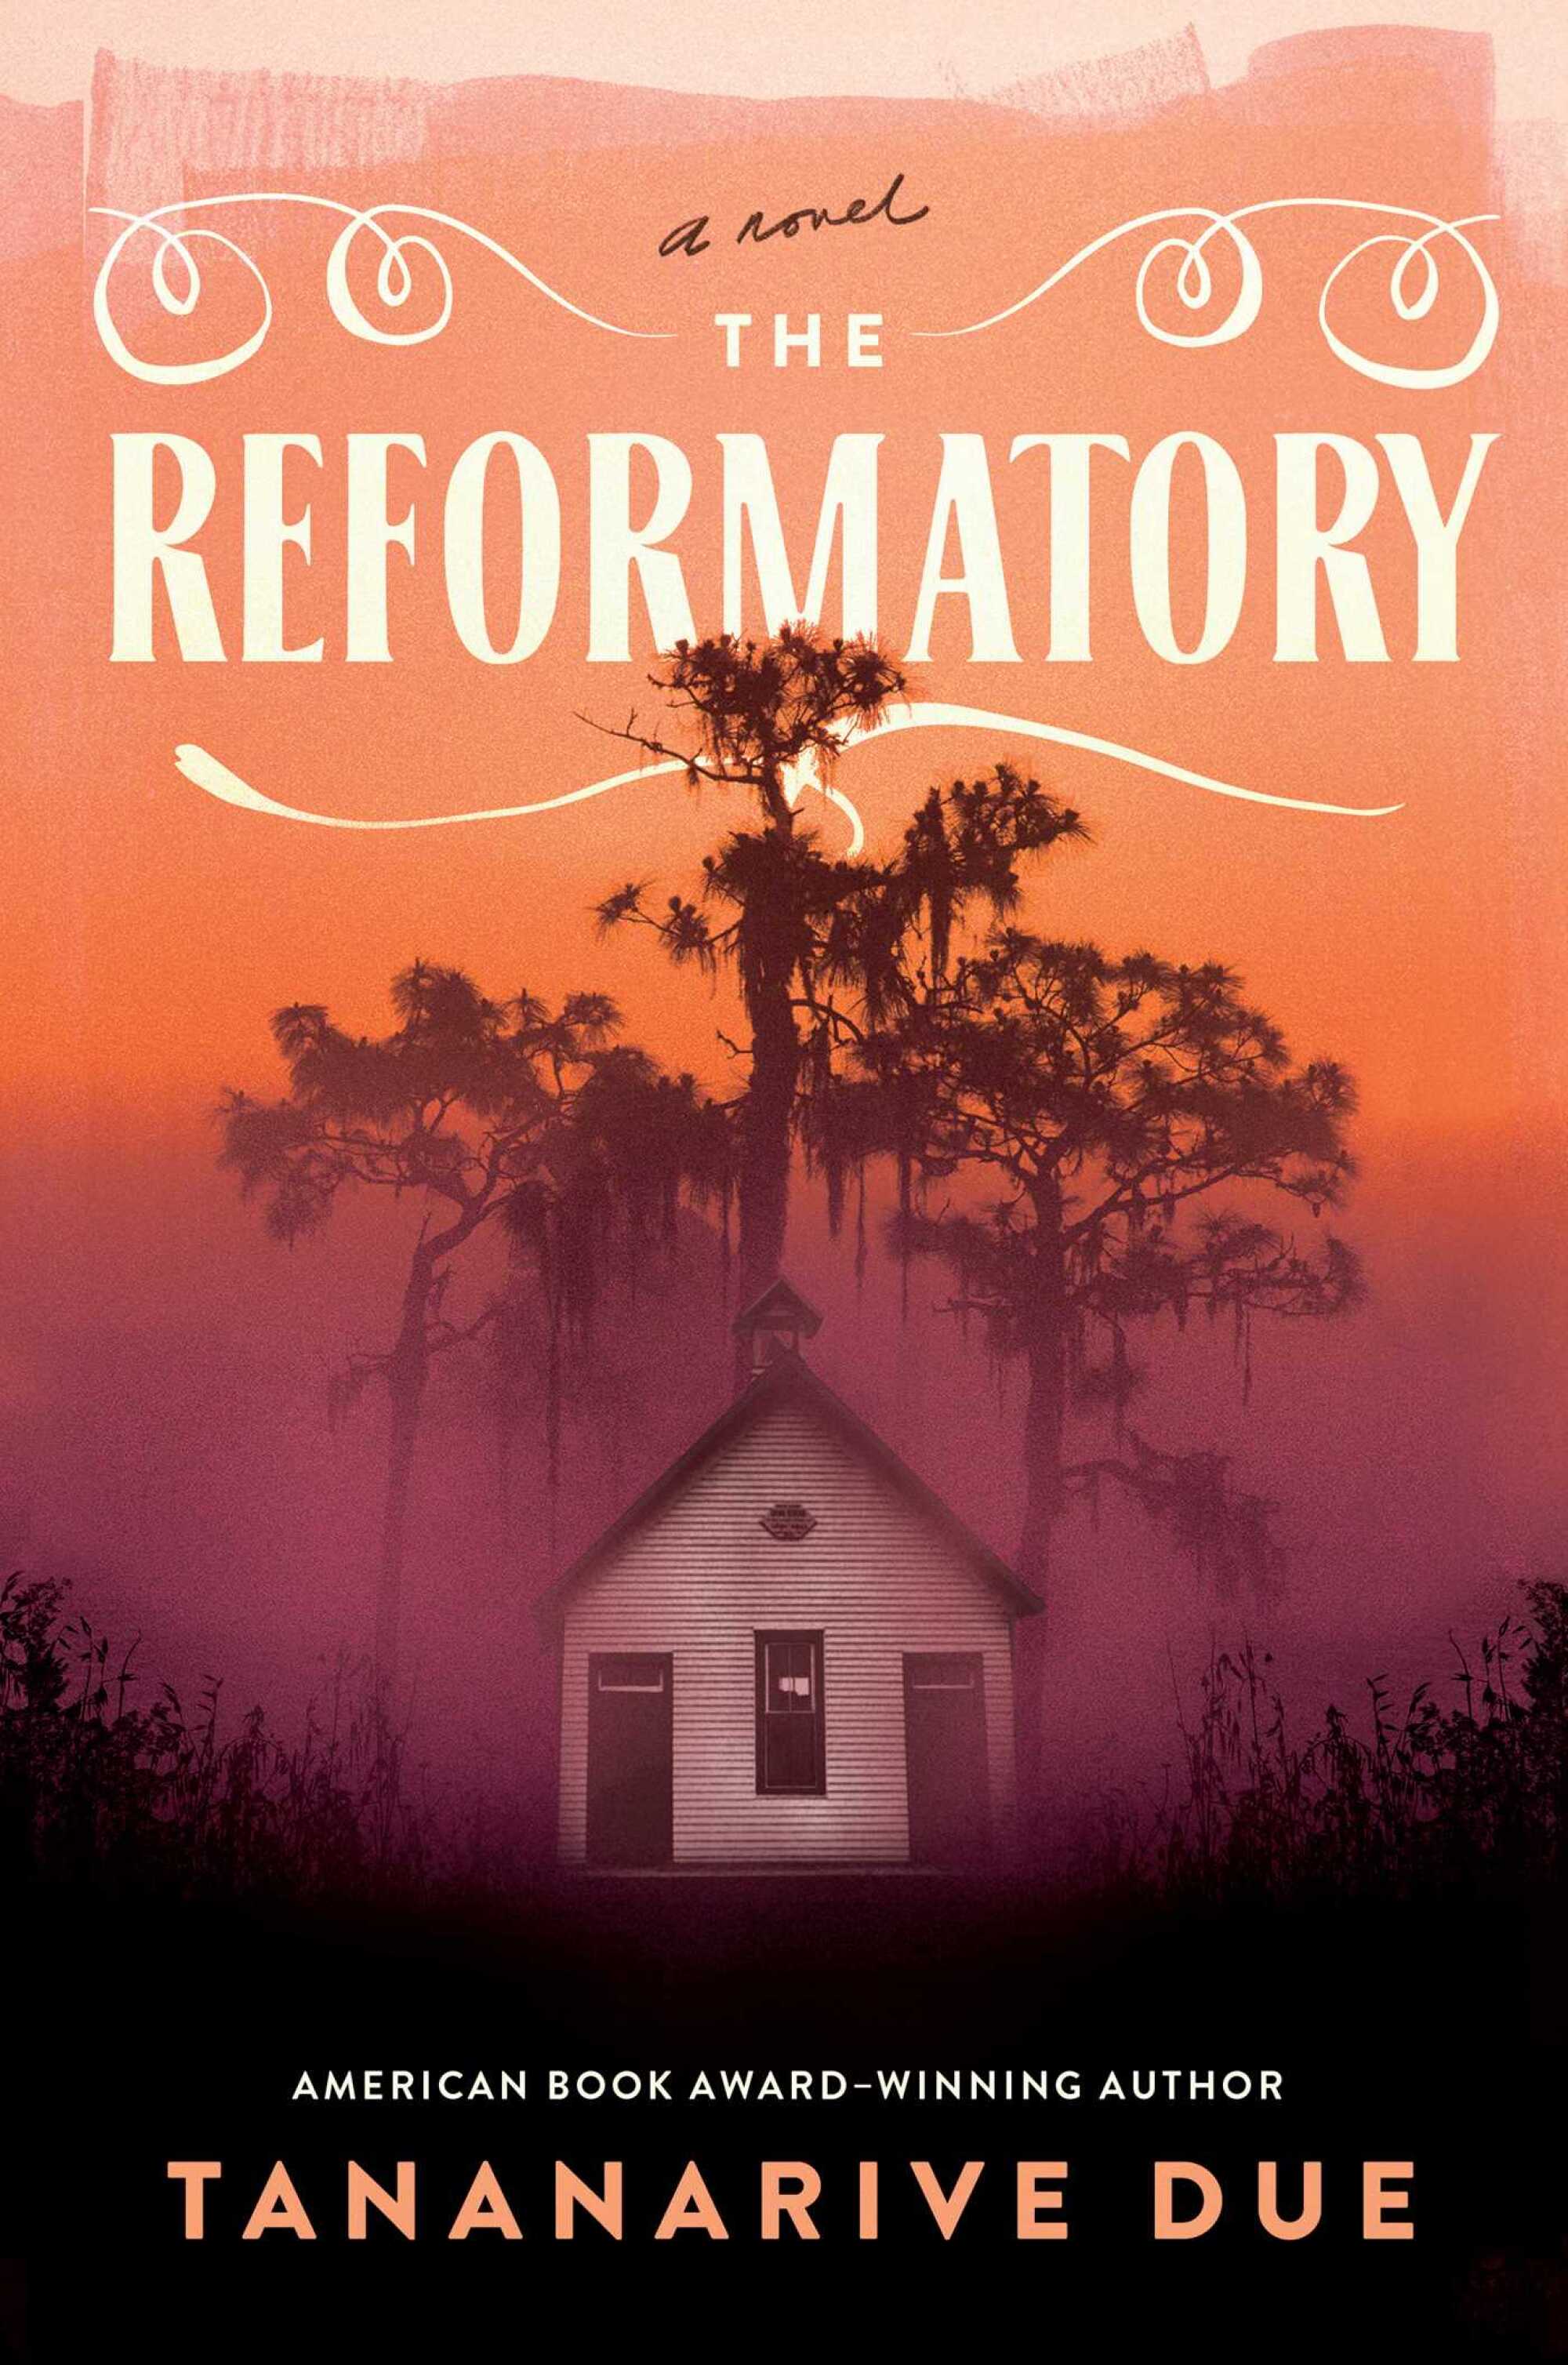 "The Reformatory," by Tananarive Due